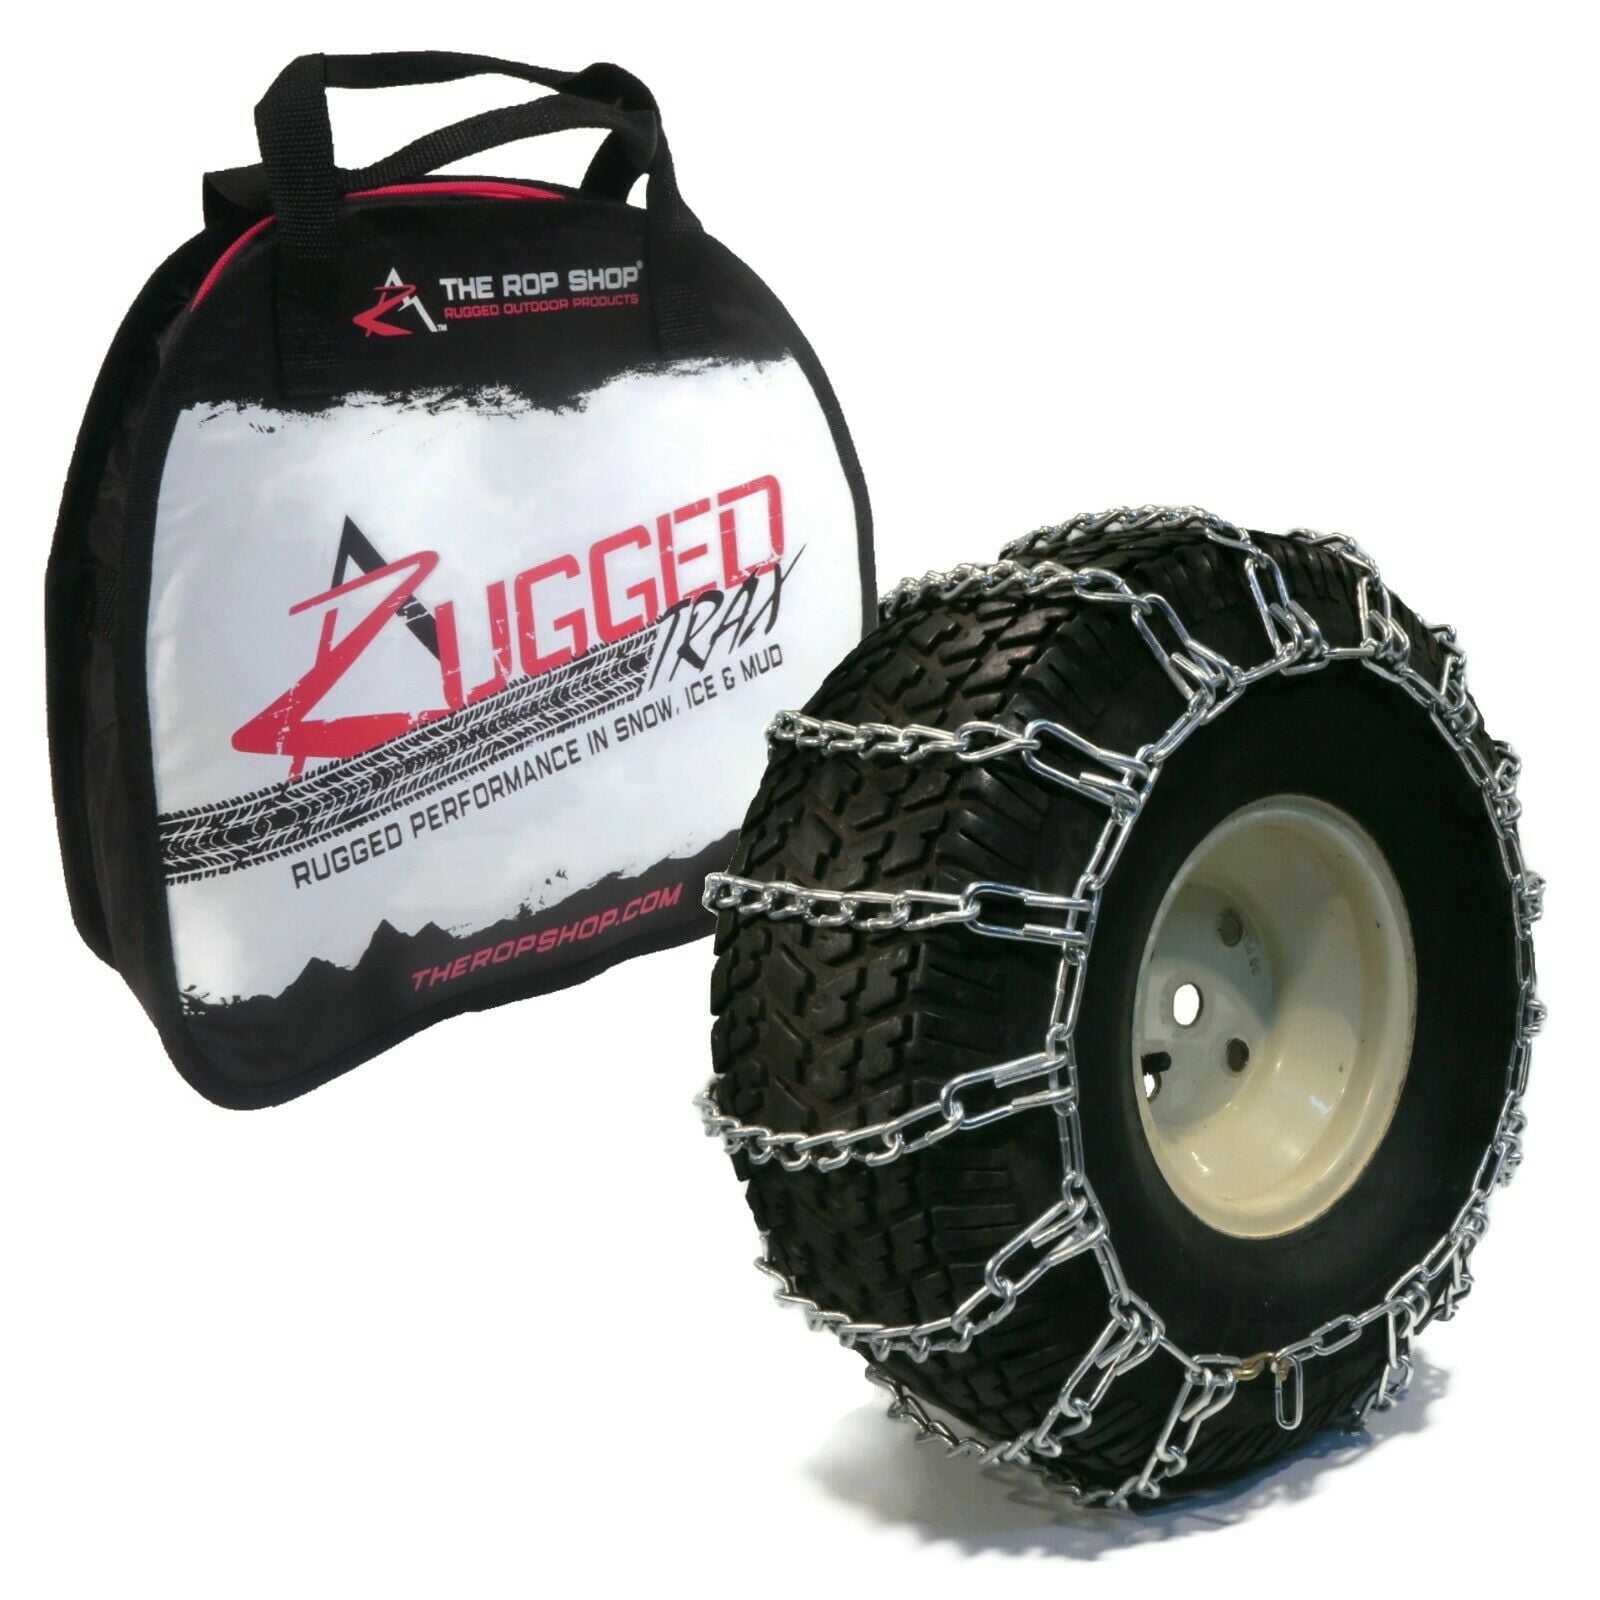 The ROP Shop TIRE Chains for John Deere 312 317 318 322 332 Tractor Mower Snow Blower 2 Link 